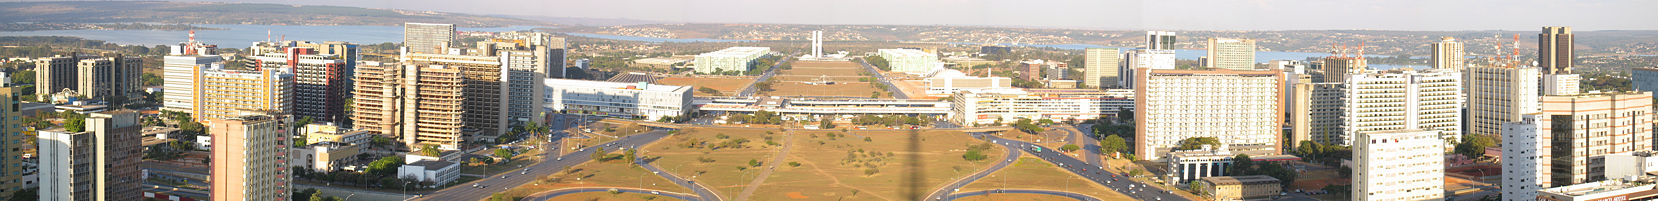 Panoramic picture of Brasília from the TV tower.